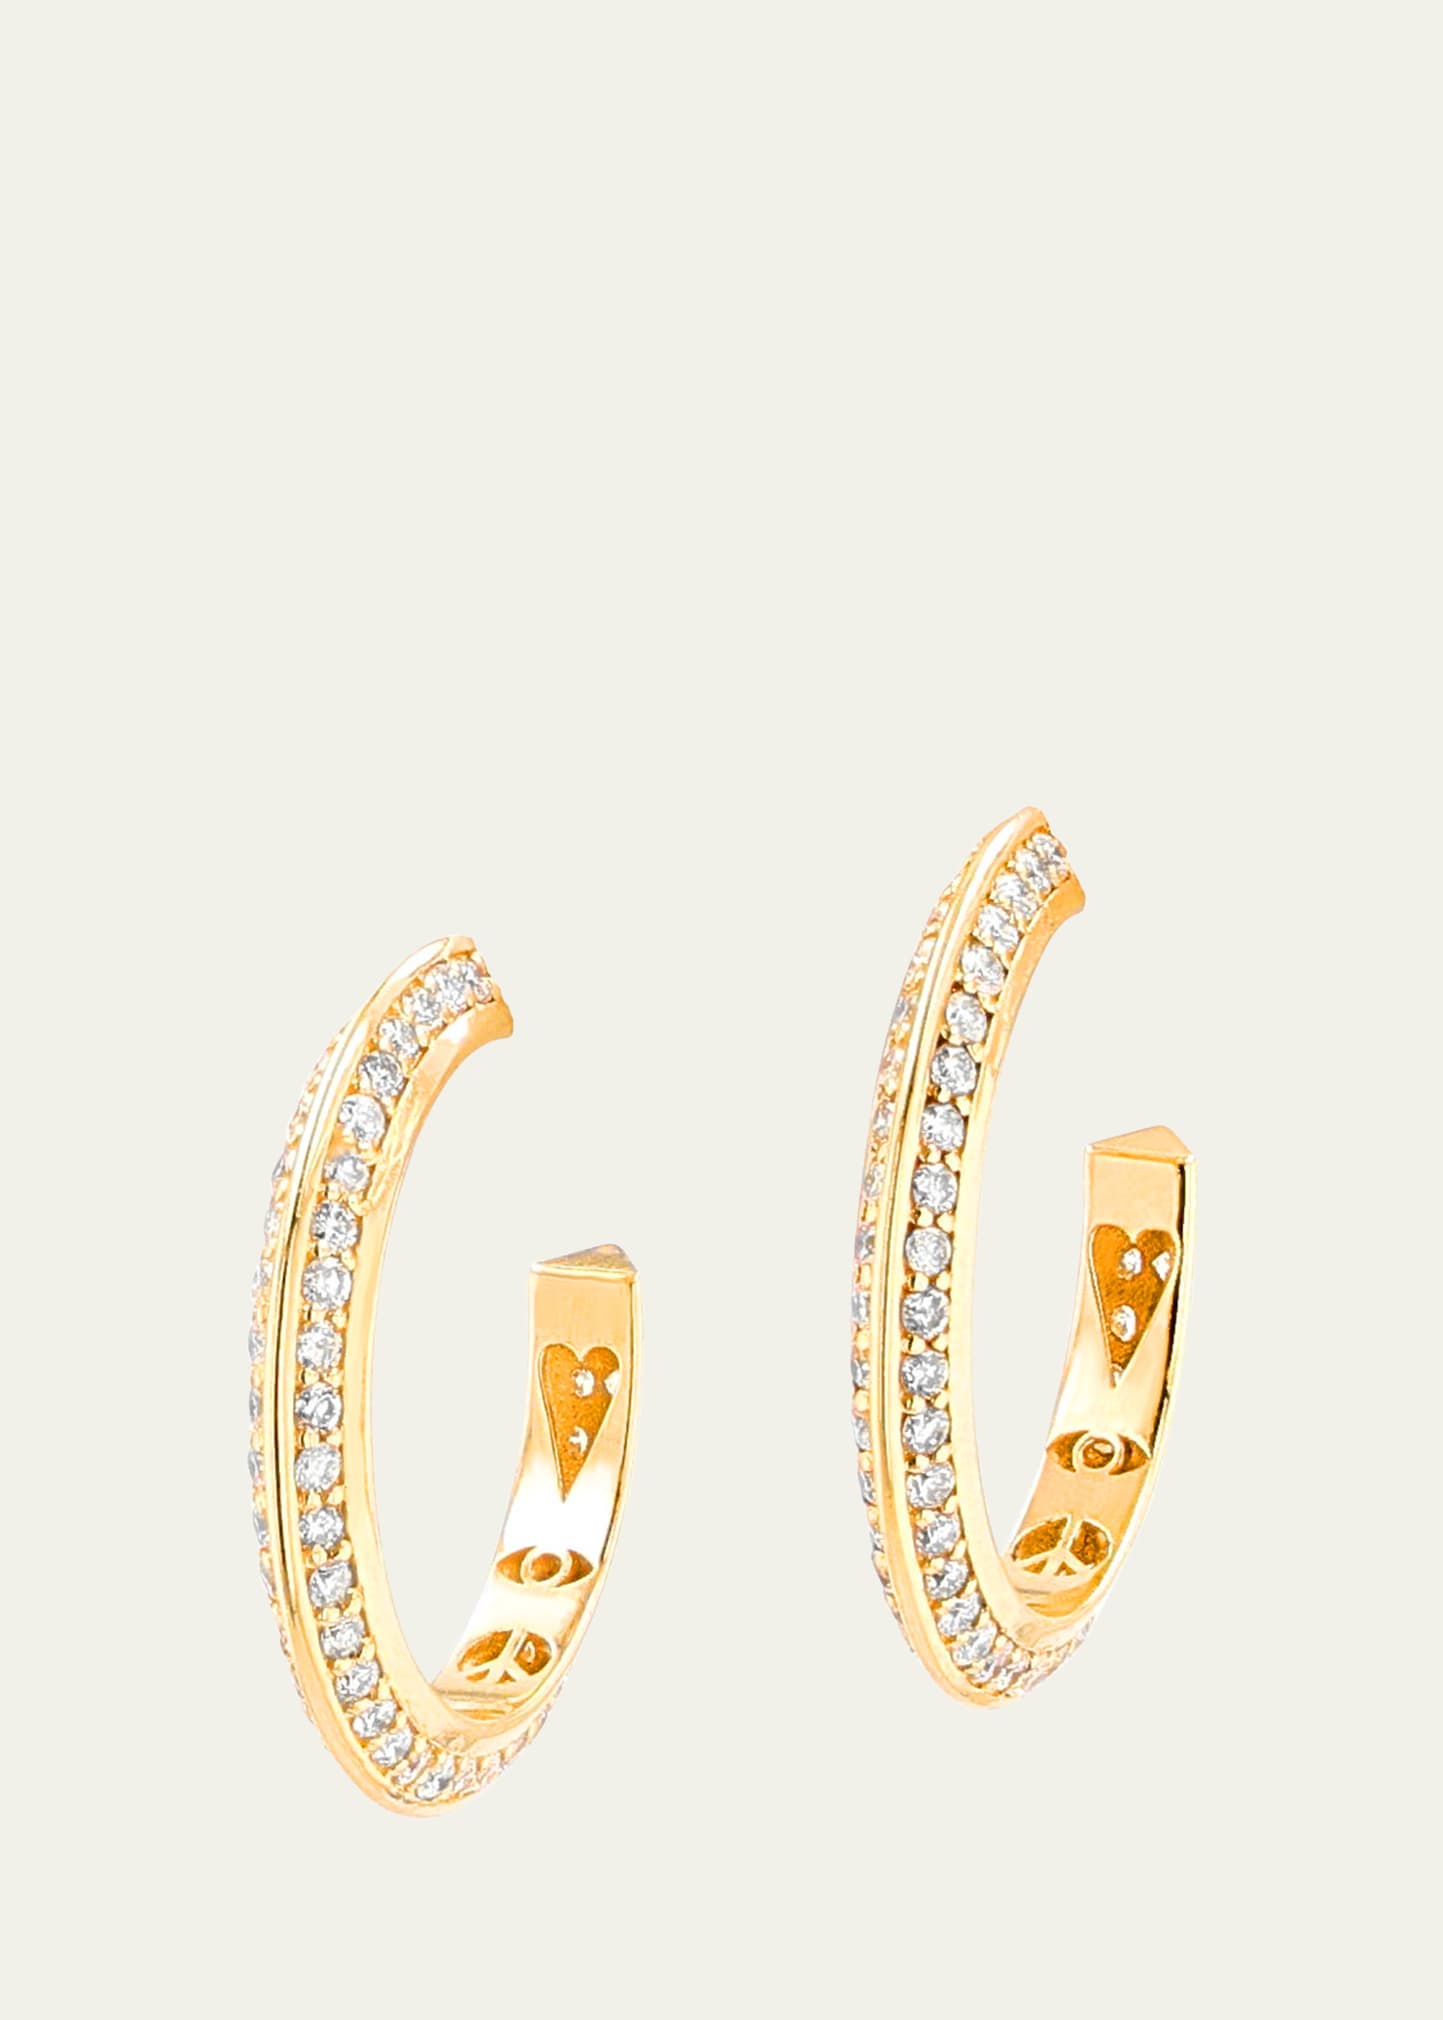 14K Yellow Gold Knife Edge 20mm Hoop Earrings with Icon Motif Gallery